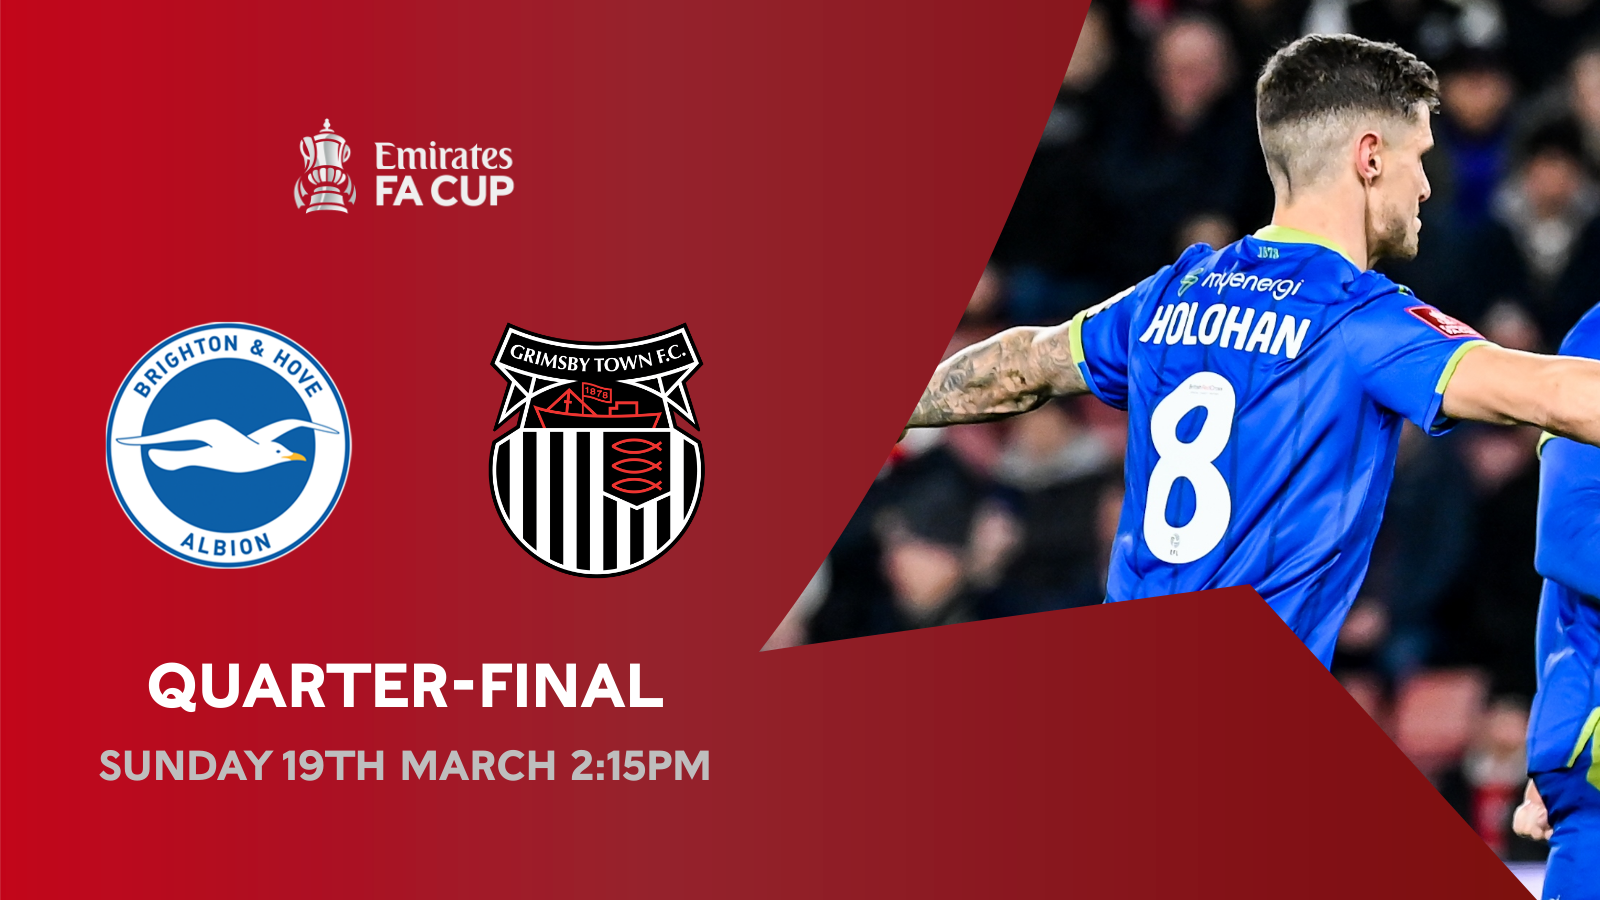 Date confirmed for FA Cup Quarter-Final